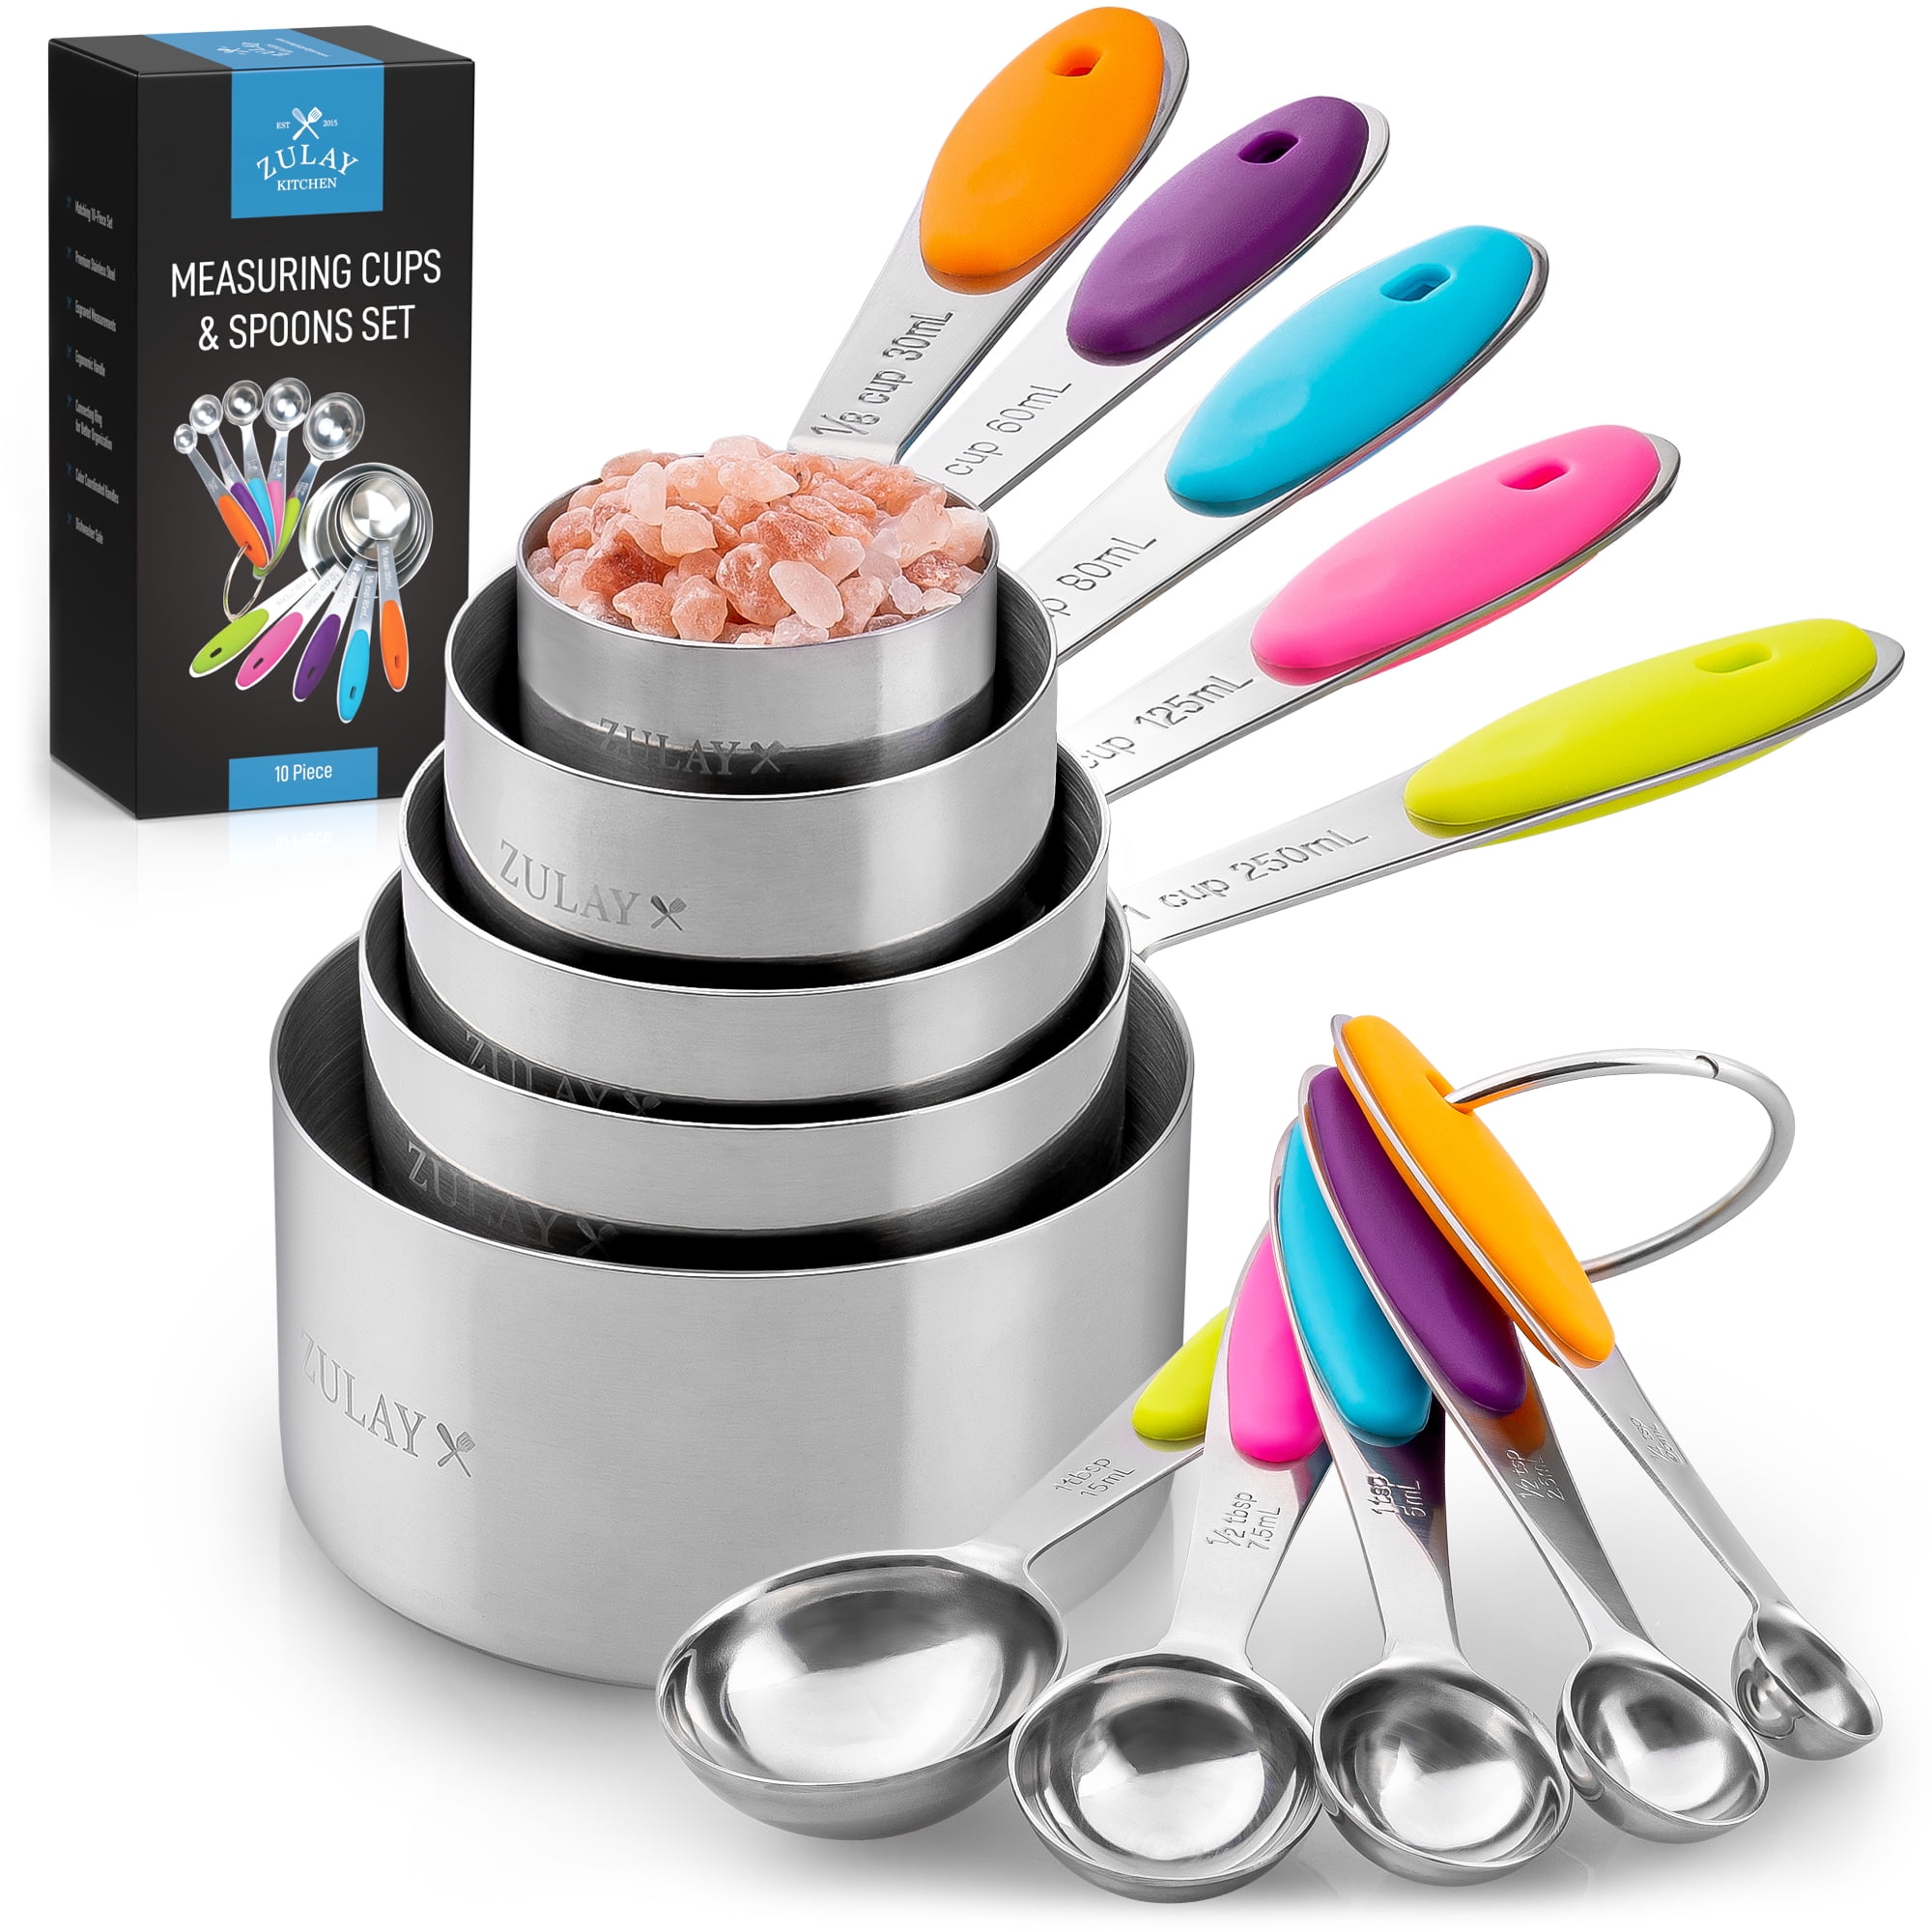 Zulay Kitchen 10-Piece Stainless Steel Measuring Cups and Spoons Set -  Multicolored Spoons and Cups 